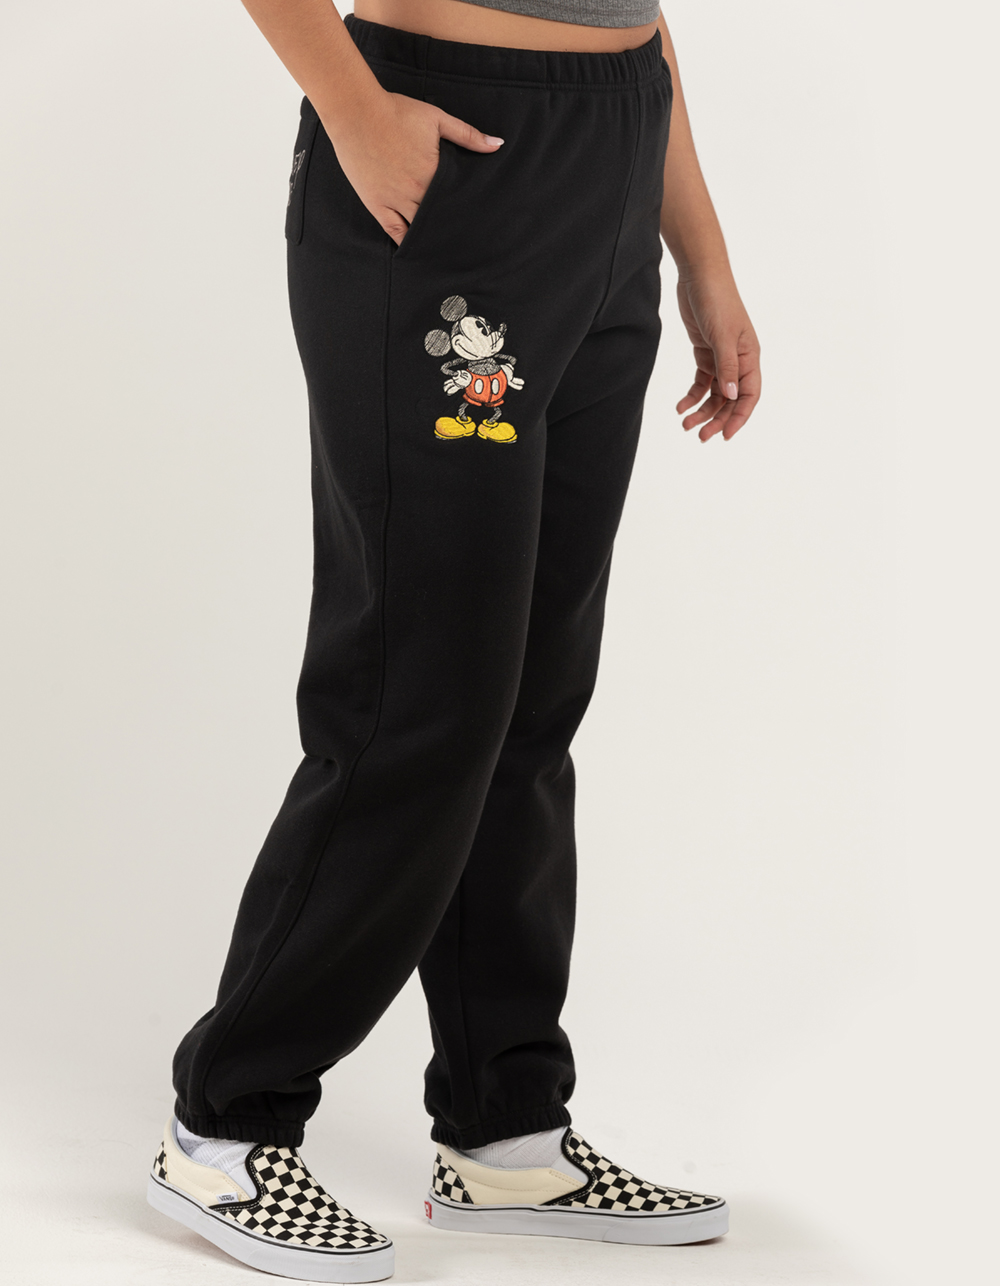 Mickey Mouse Sweatpants for Adults, Disney Store